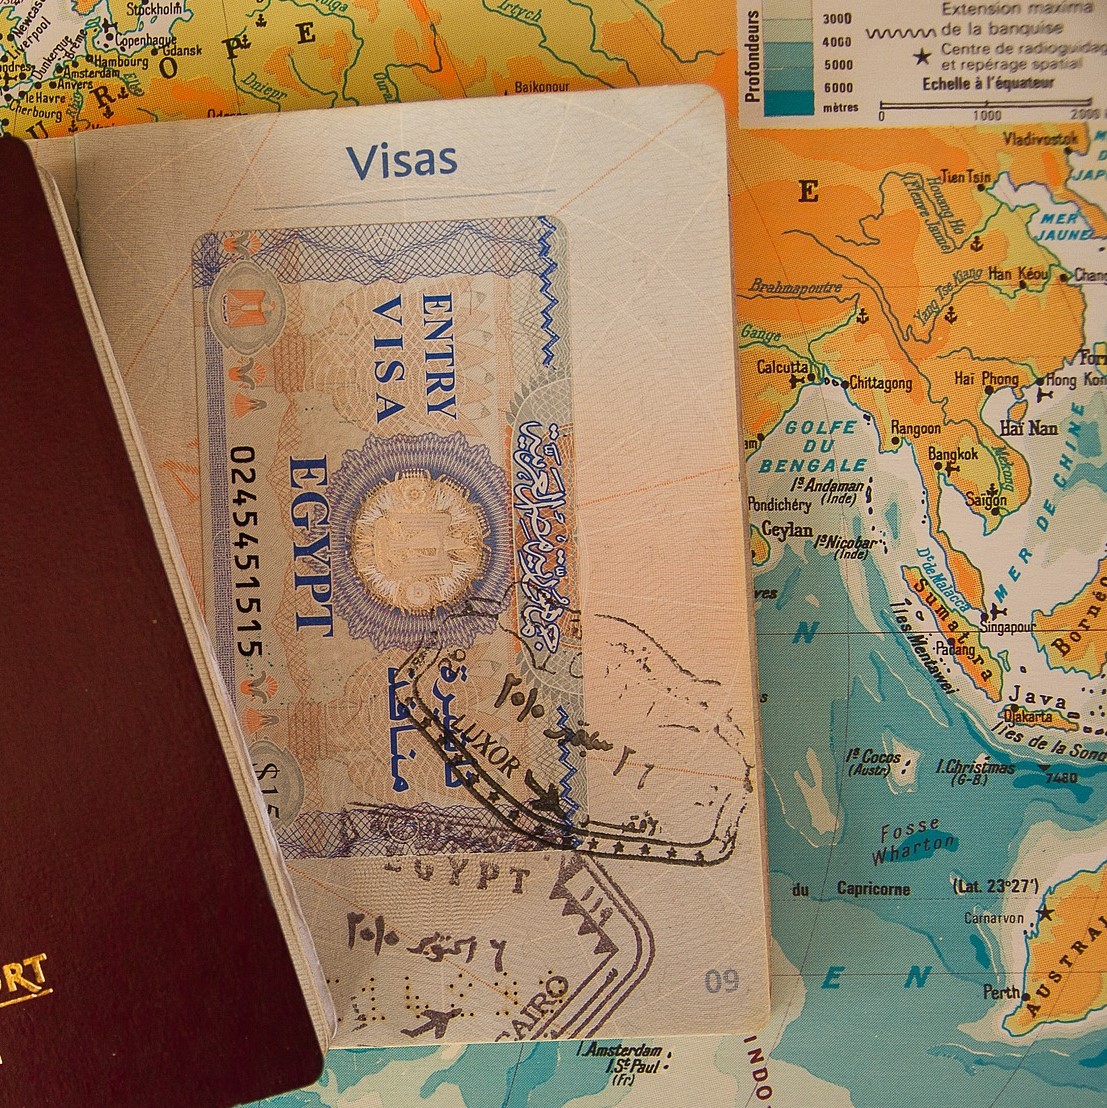 Researching your visas​